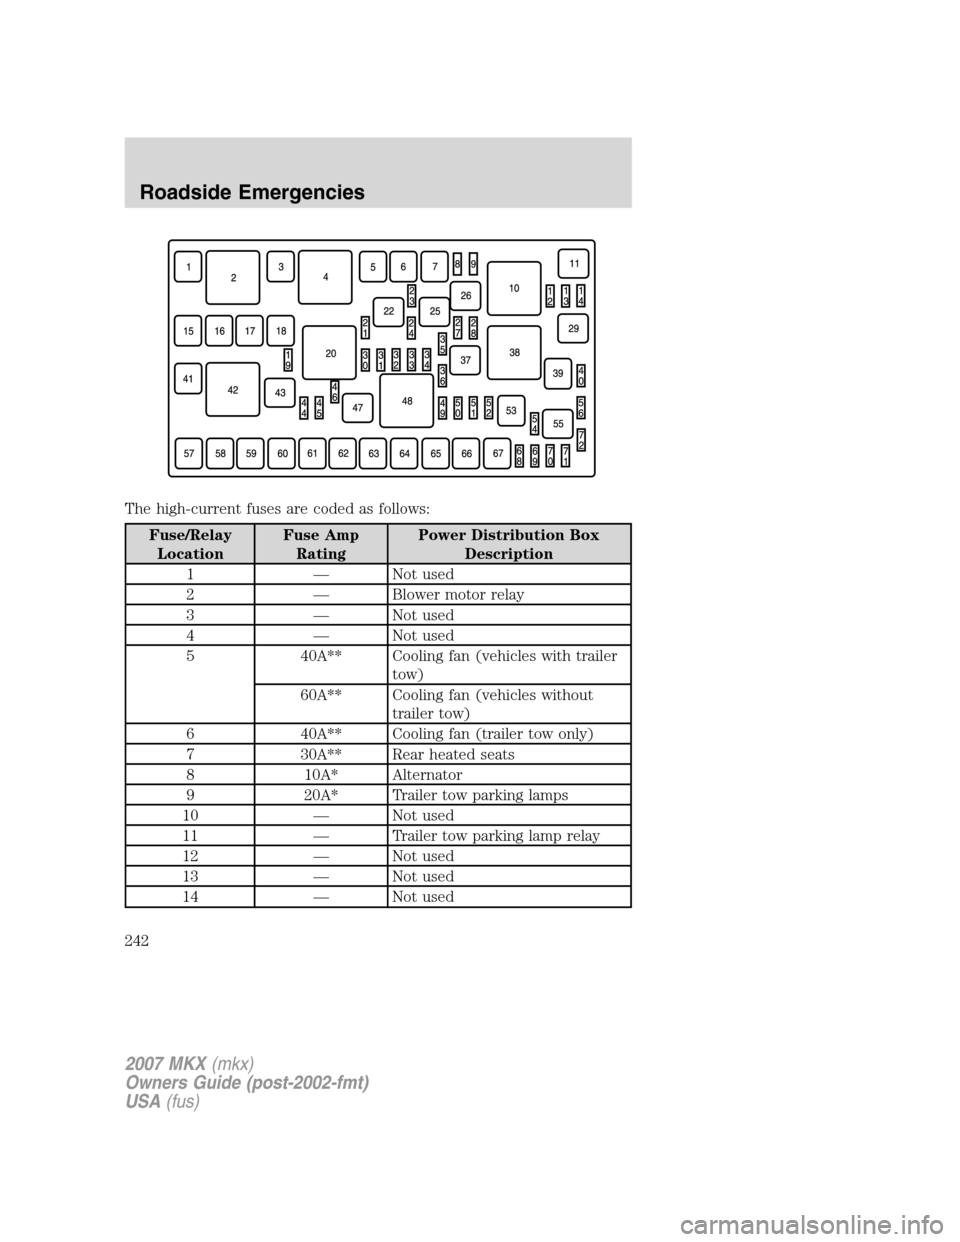 LINCOLN MKX 2007  Owners Manual The high-current fuses are coded as follows:
Fuse/Relay
LocationFuse Amp
RatingPower Distribution Box
Description
1 — Not used
2 — Blower motor relay
3 — Not used
4 — Not used
5 40A** Cooling 